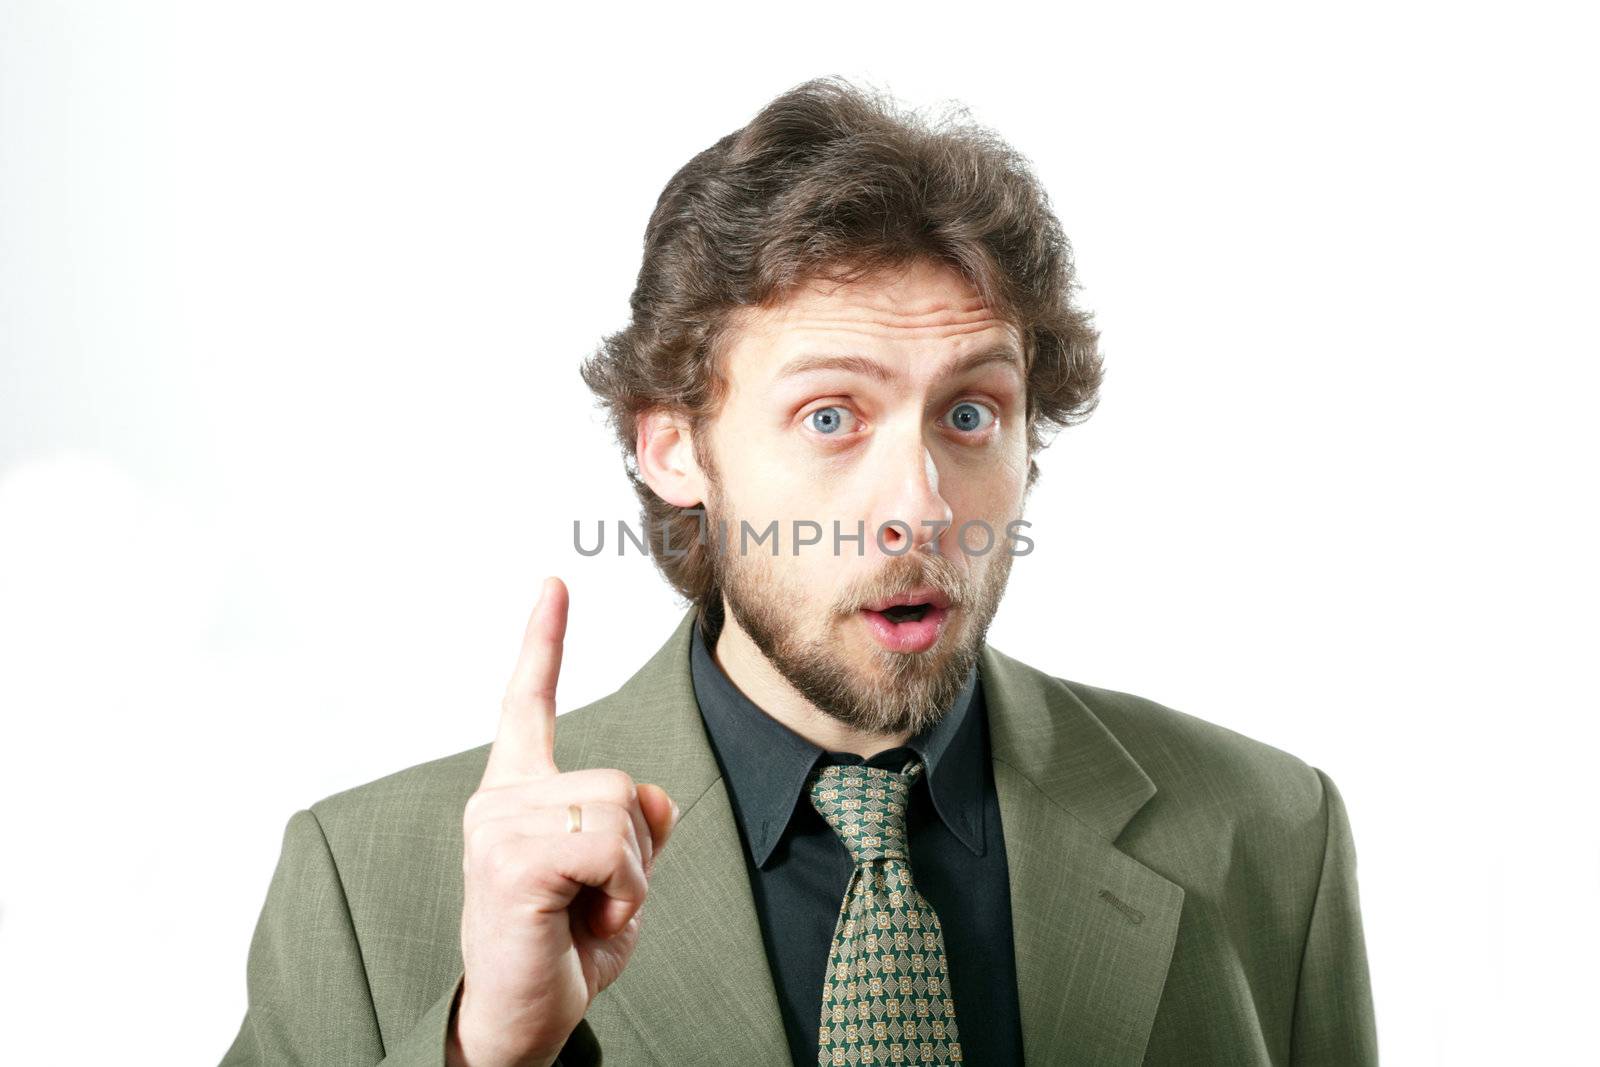 An image of a man with his finger up